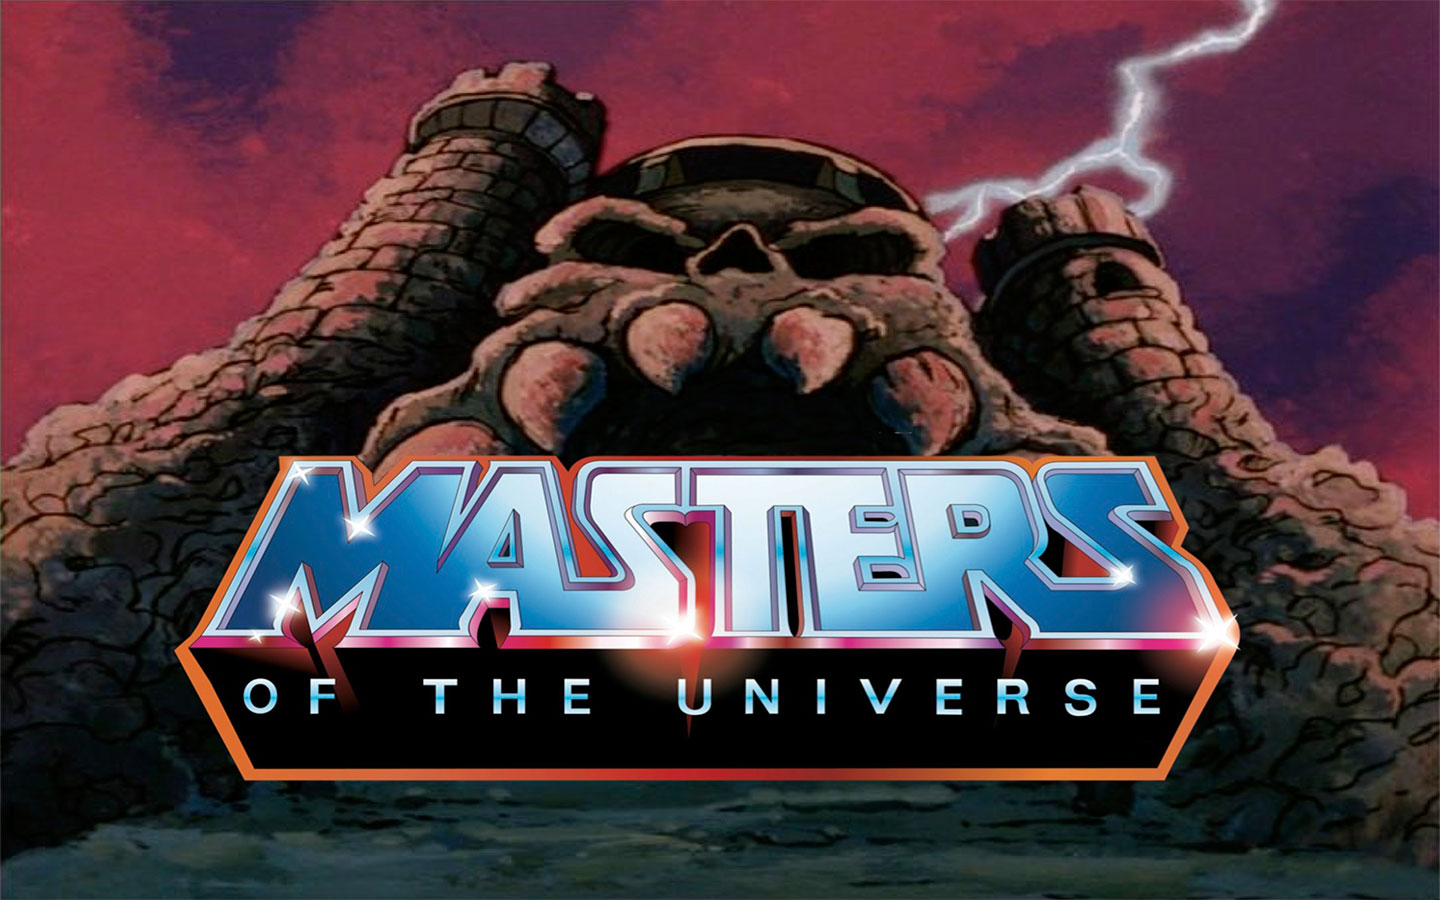 1920x1080 / 1920x1080 he man and the masters of the universe hd JPG 331 kB  - Coolwallpapers.me!